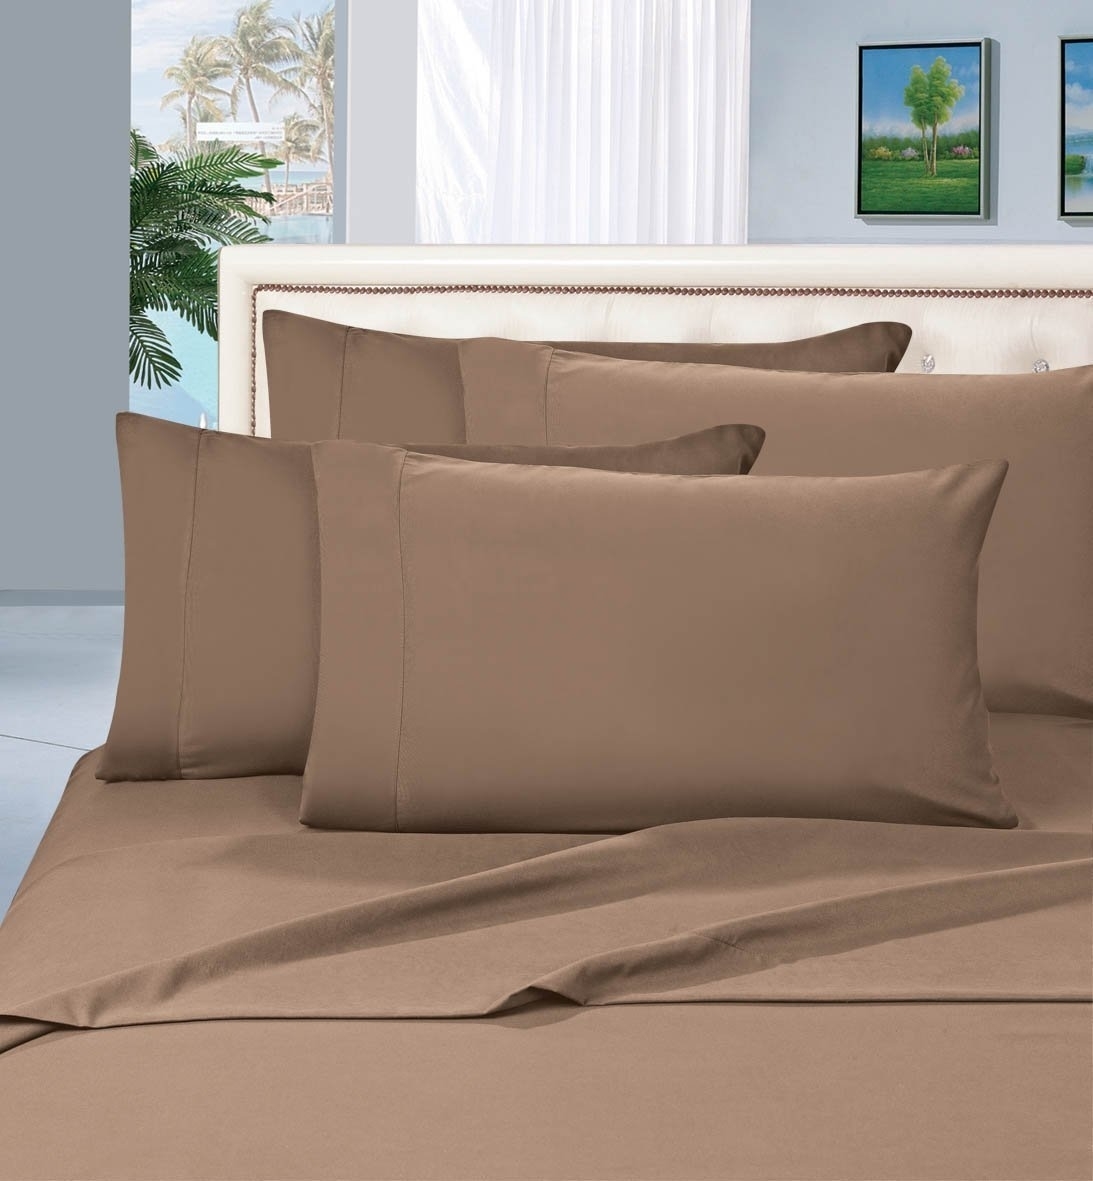 Elegant Comfort 1500 Series Wrinkle Resistant Egyptian Quality Hypoallergenic Ultra Soft Luxury 4-piece Bed Sheet Set, King, Taupe